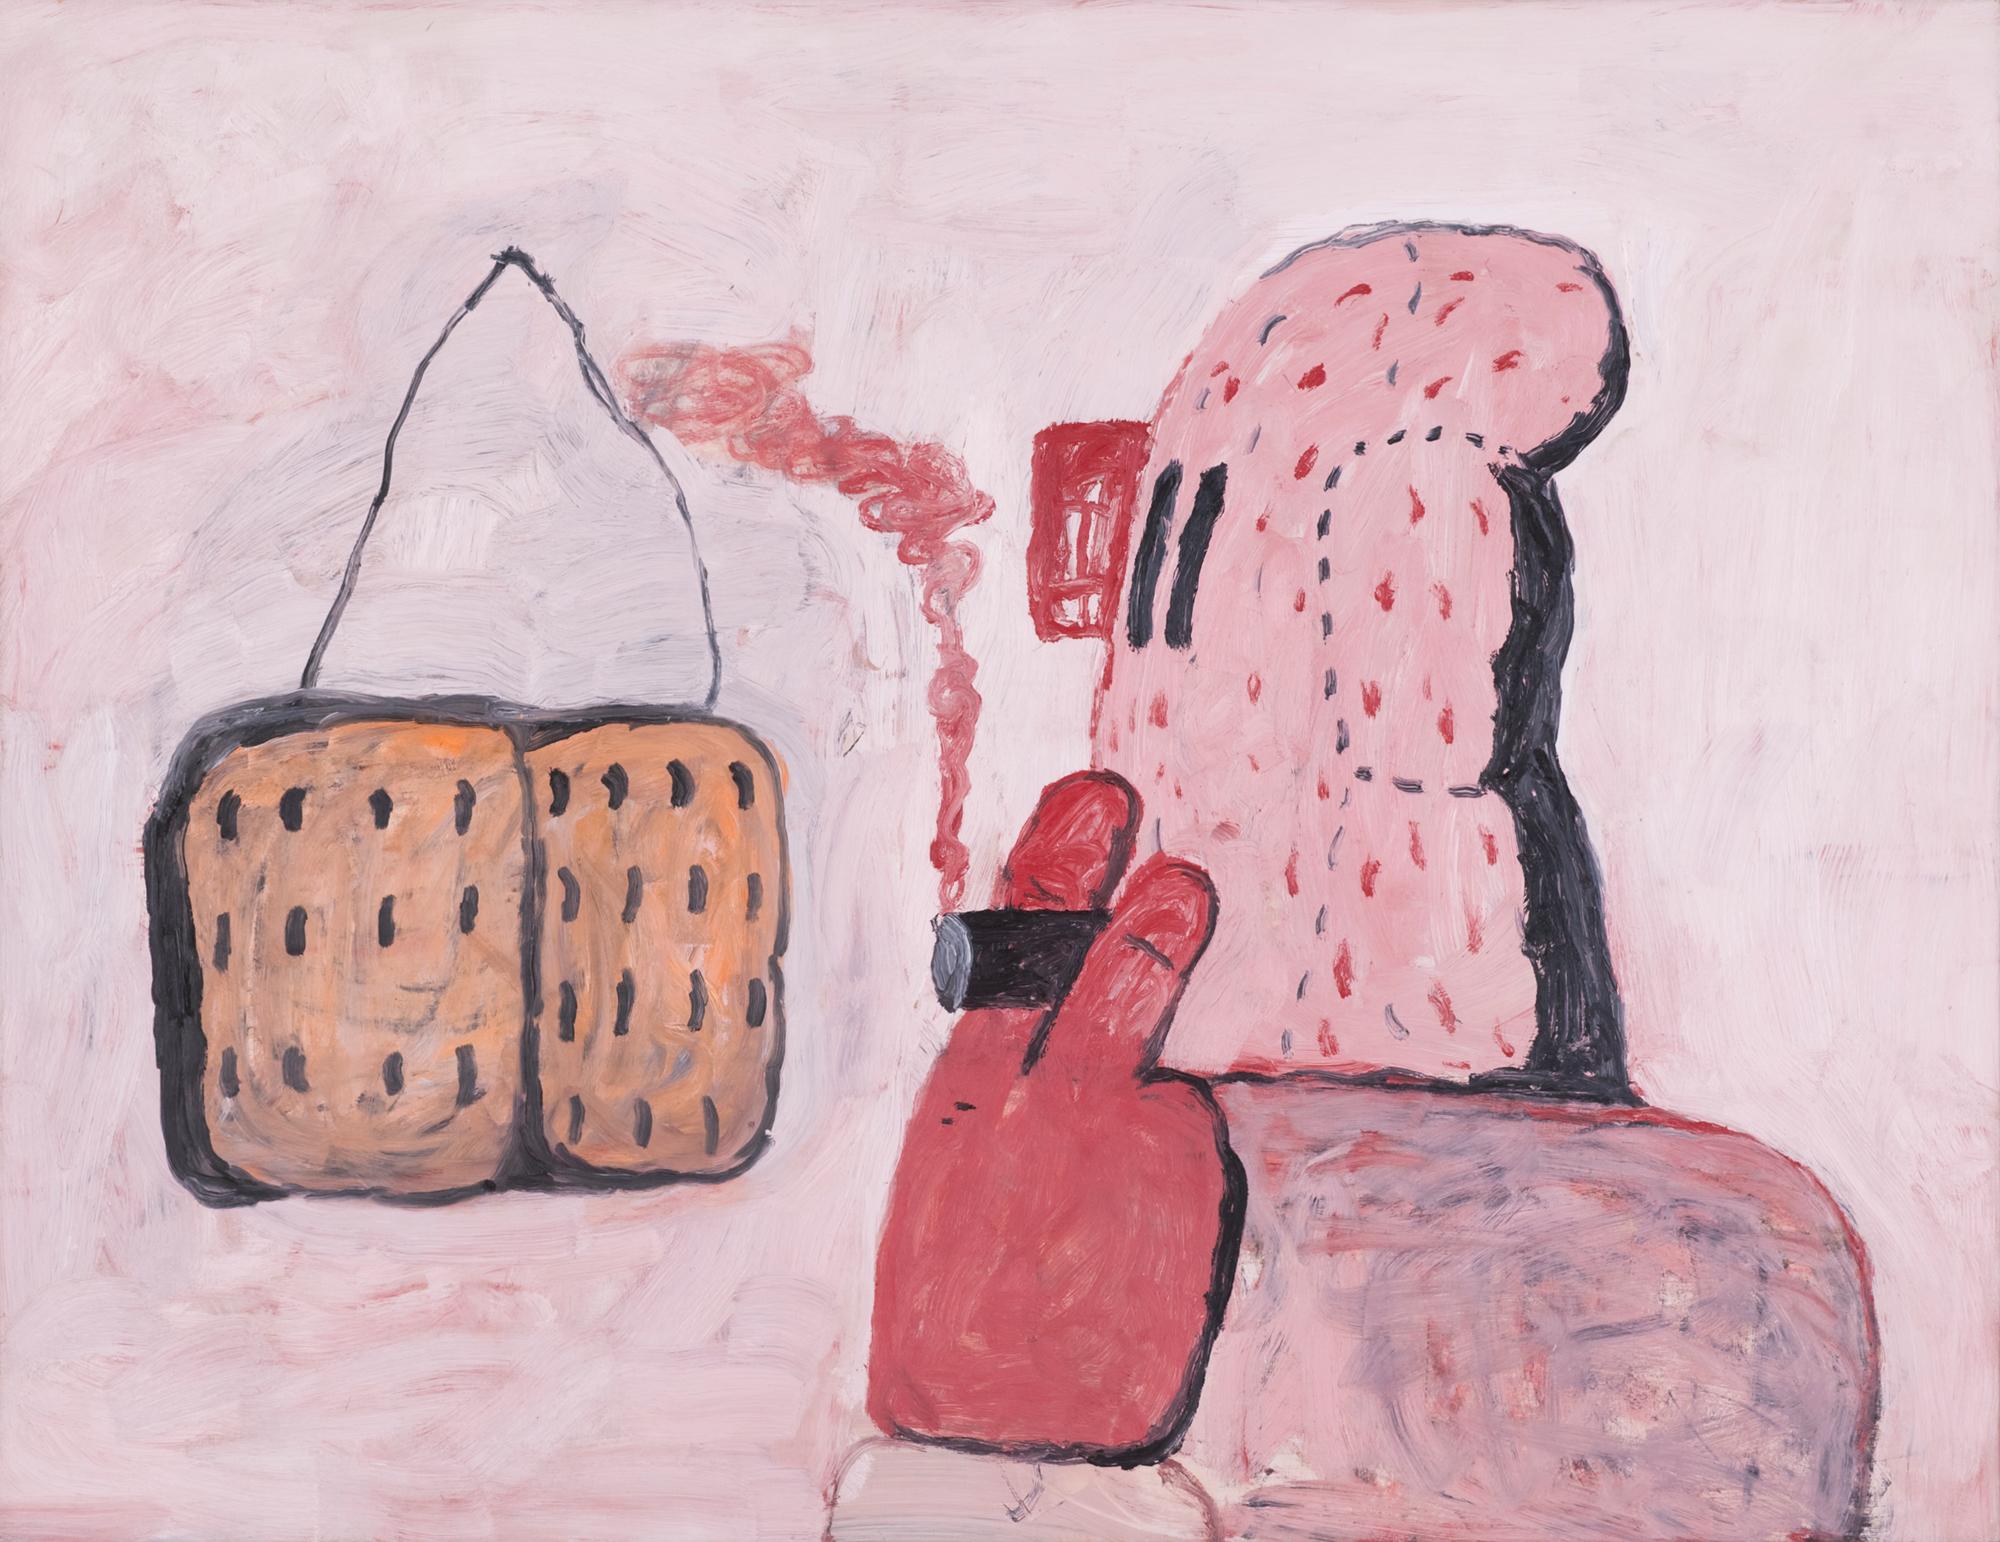 Untitled, Philip Guston, 1971, Courtesy of Fredriksen Family Collection 